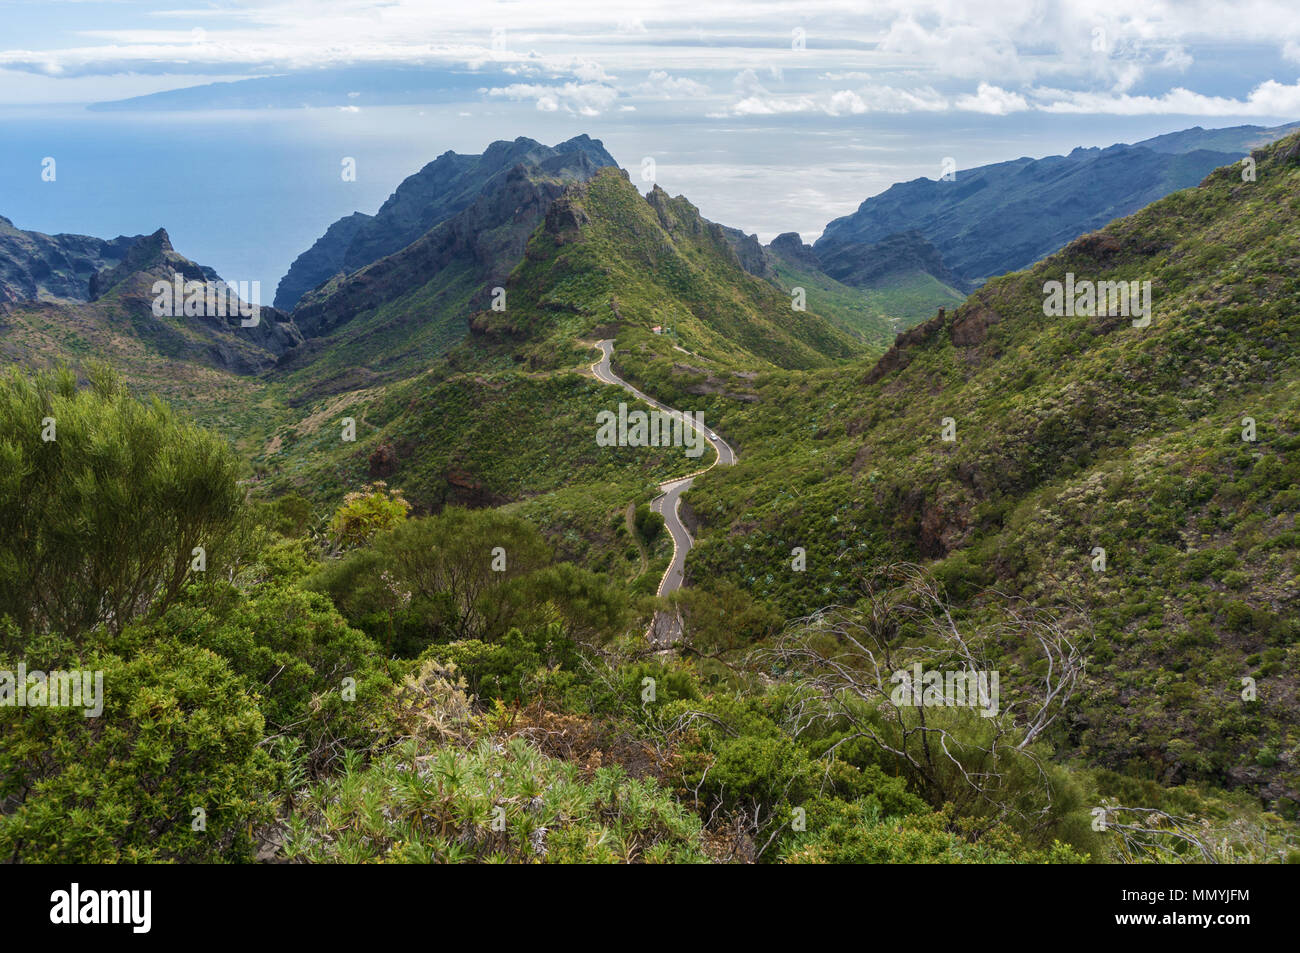 Hilly Landscape with winding road Stock Photo